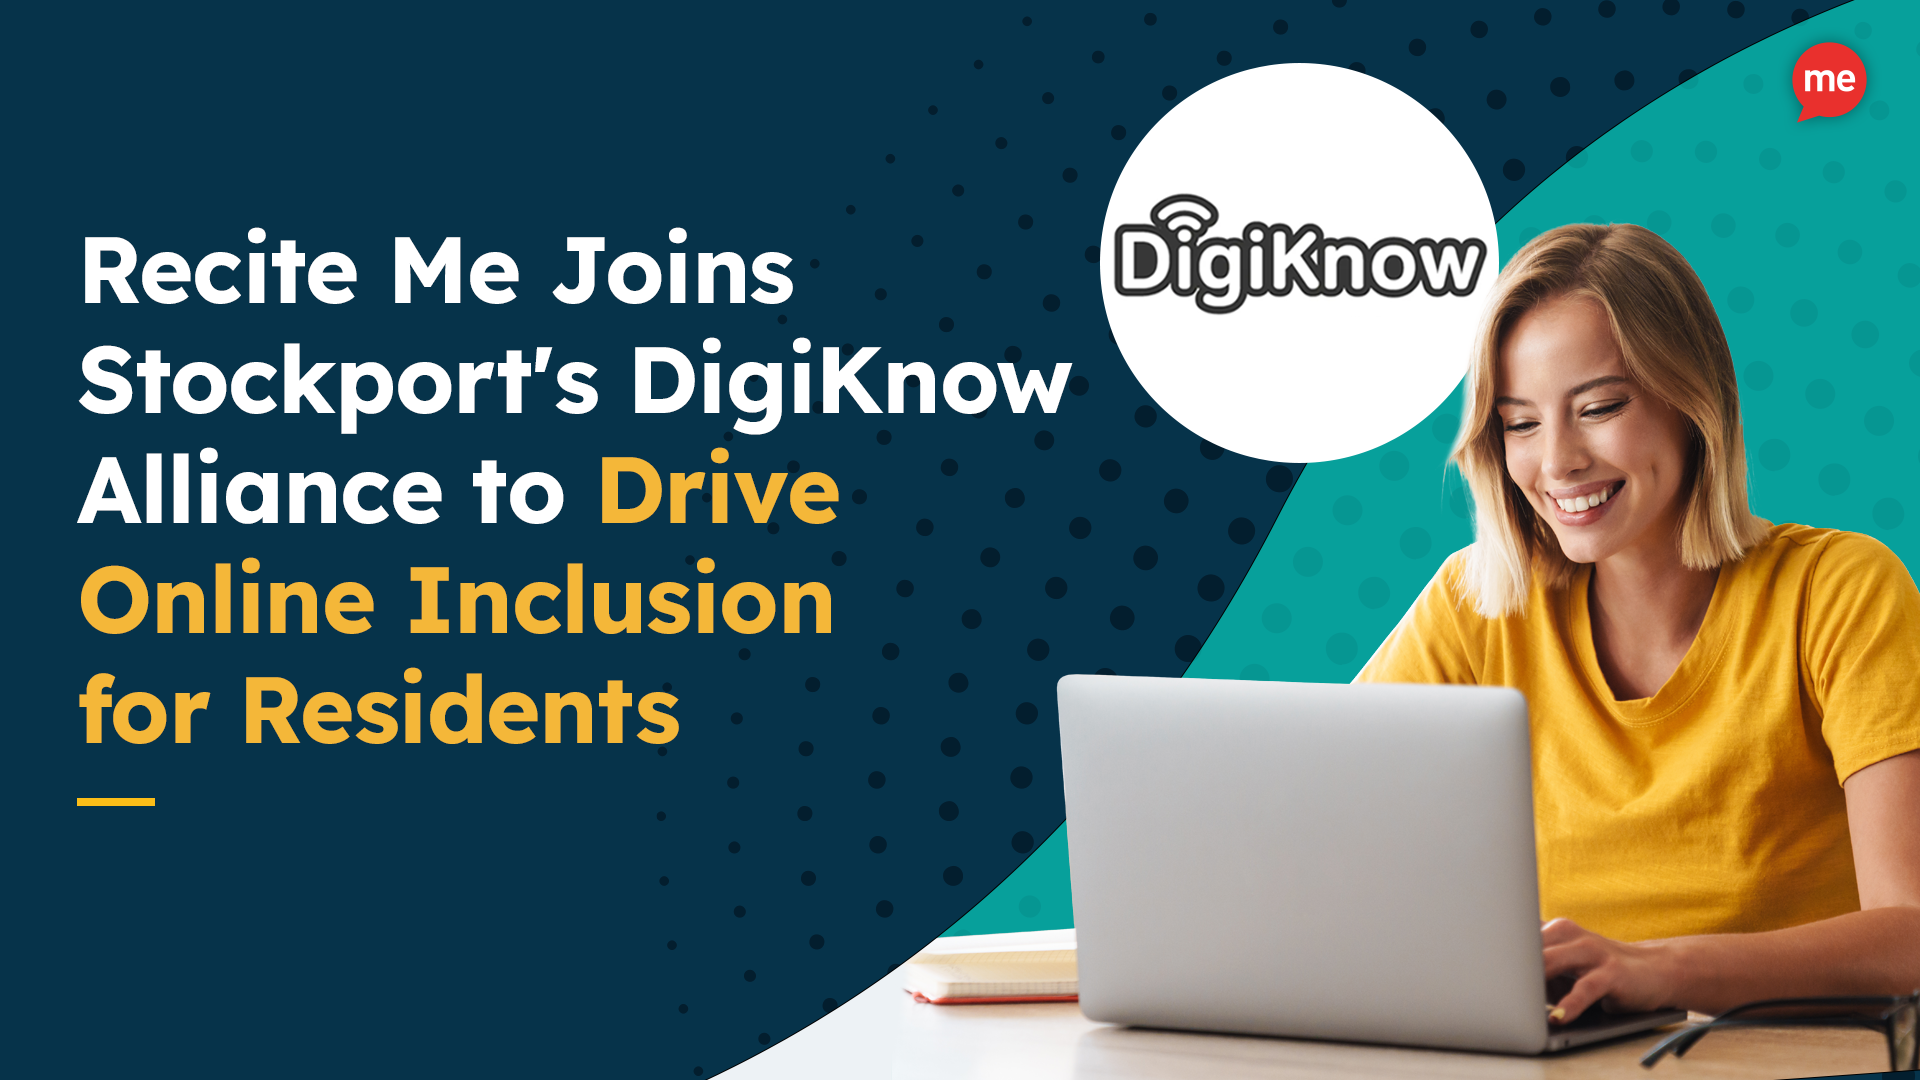 Recite Me Joins Stockport's DigiKnow Alliance to Drive Online Inclusion for Residents